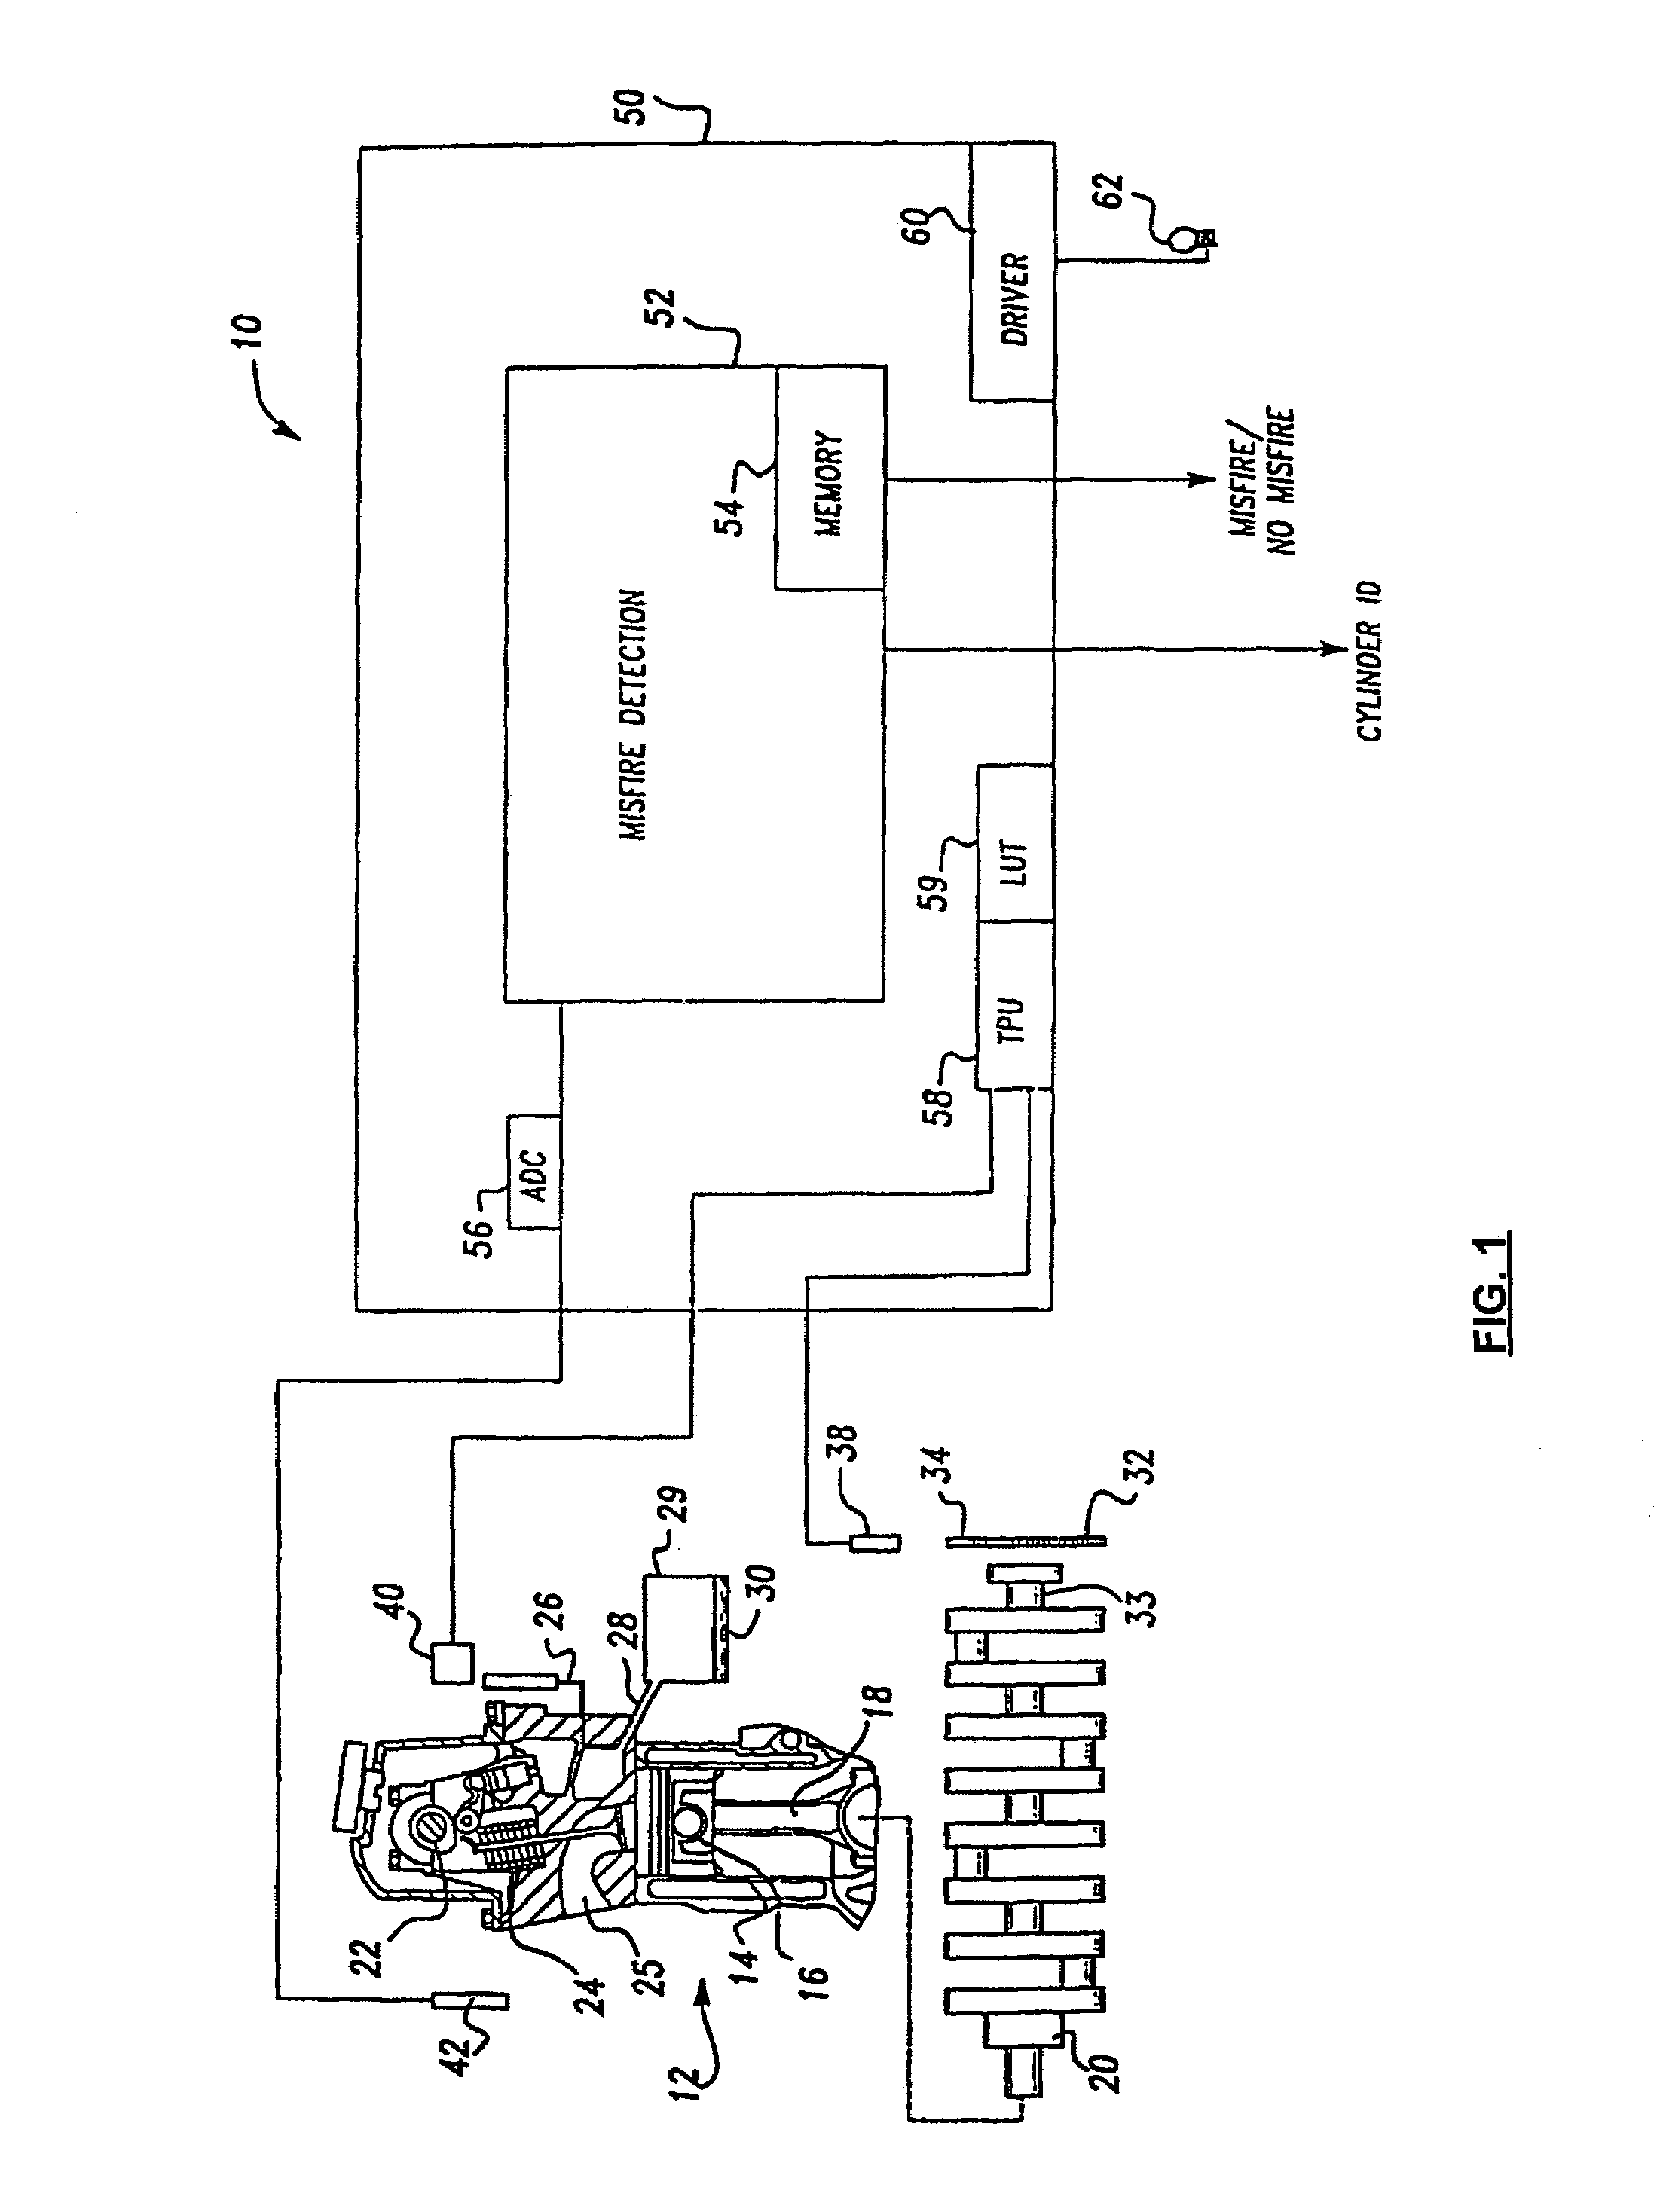 Automatic calibration method for engine misfire detection system